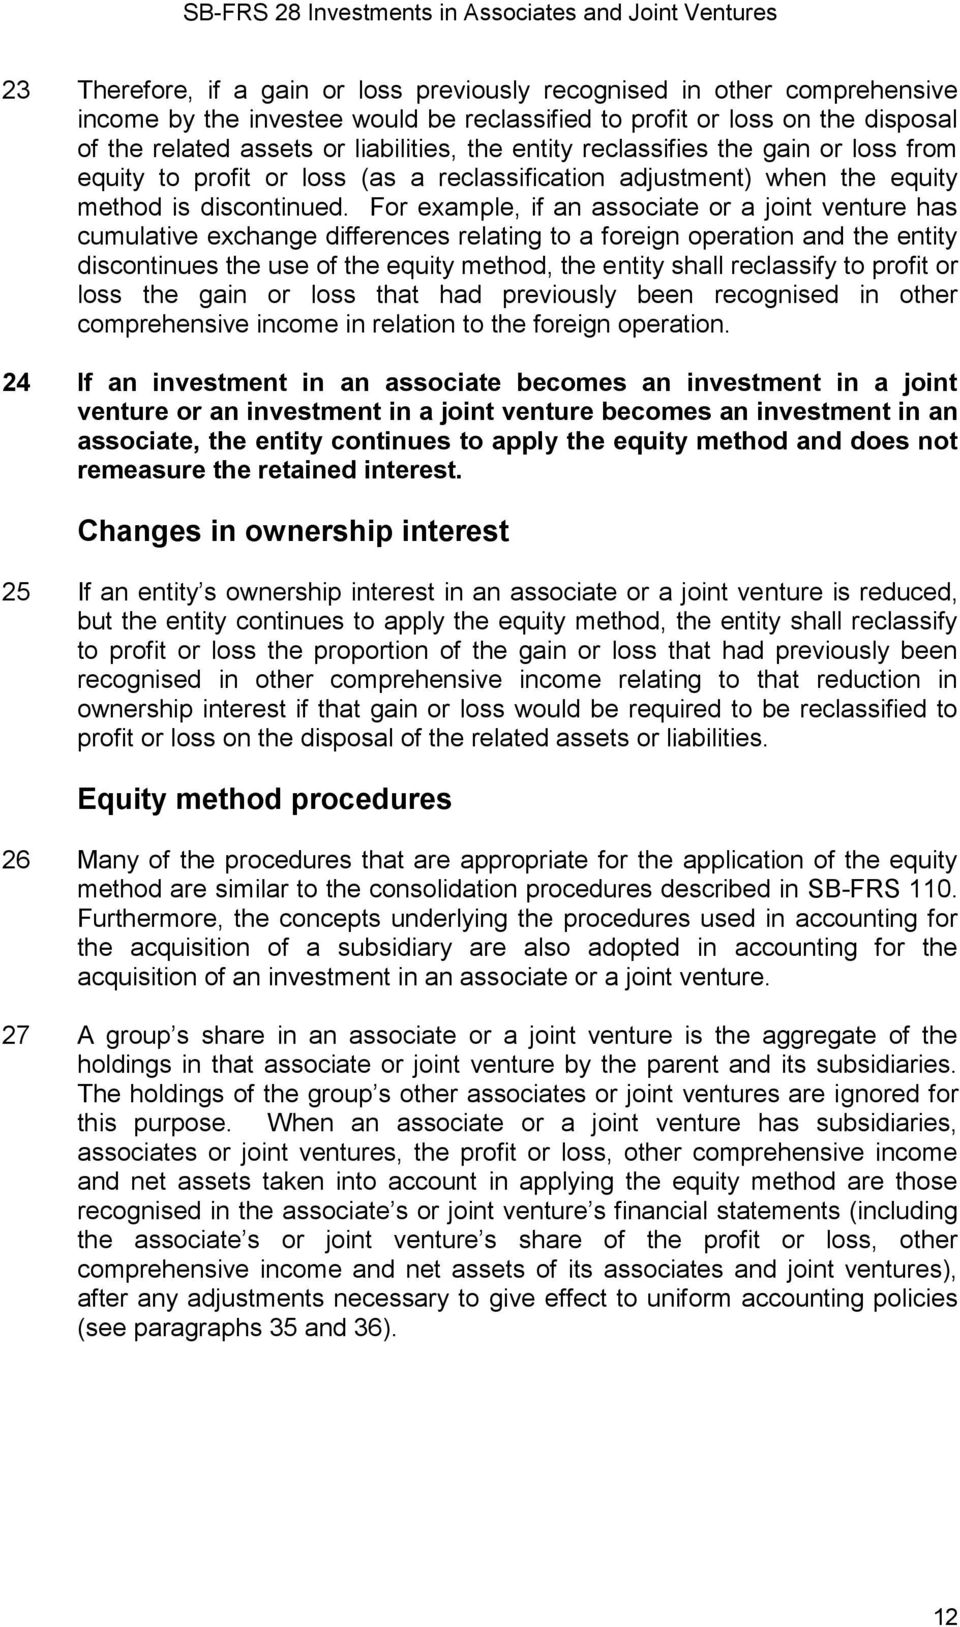 For example, if an associate or a joint venture has cumulative exchange differences relating to a foreign operation and the entity discontinues the use of the equity method, the entity shall